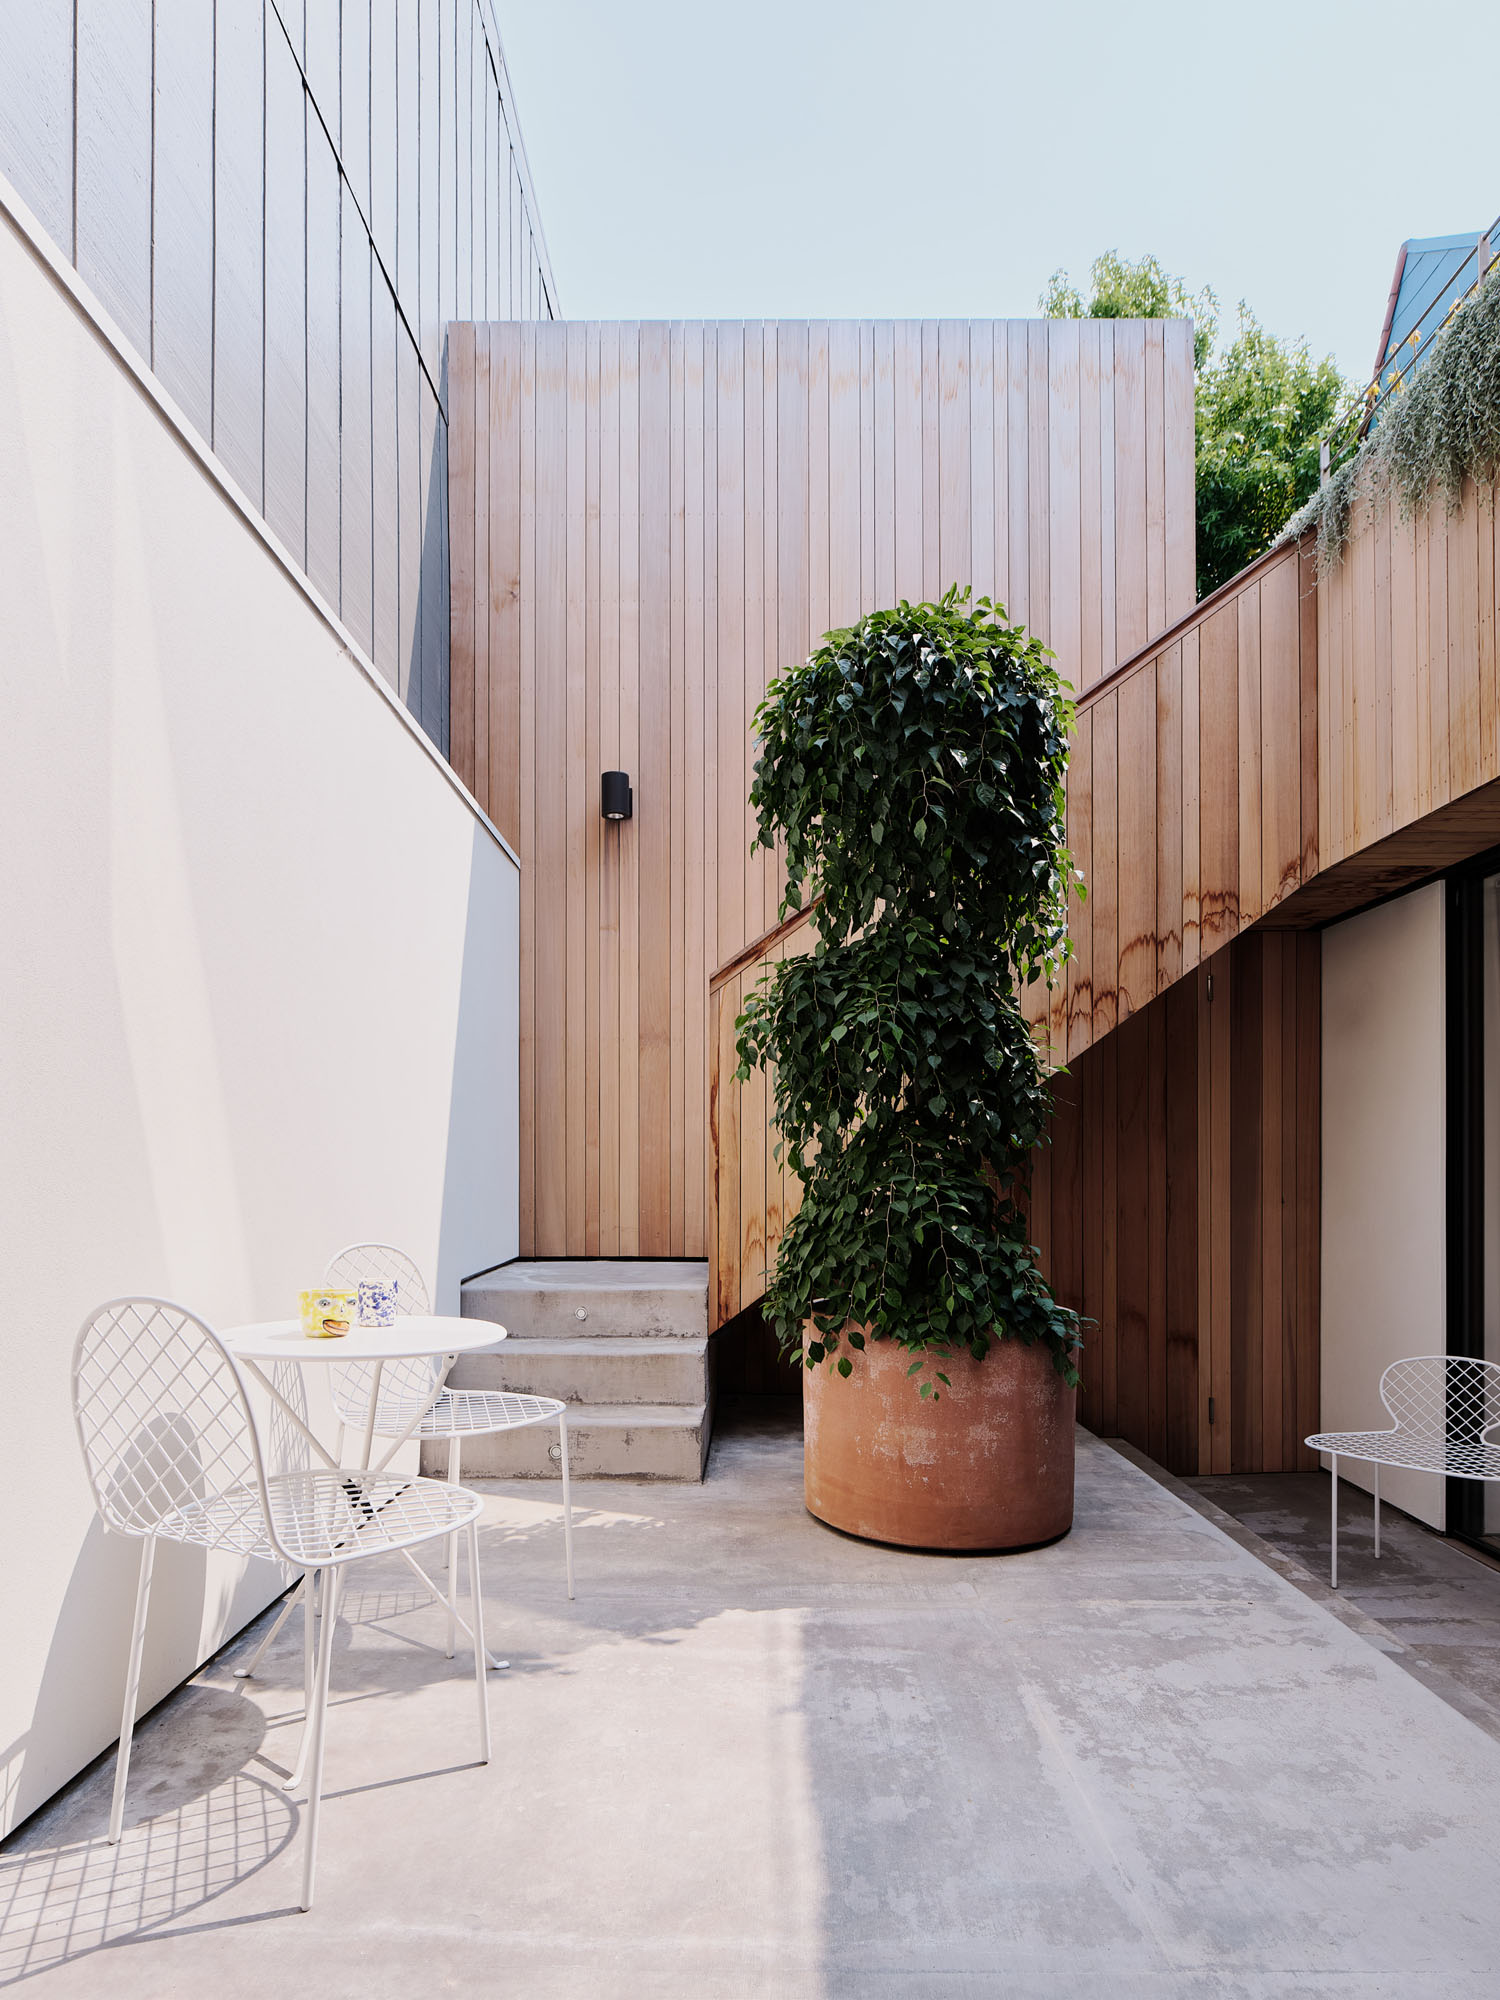 image of a small courtyard with a concrete patio, exterior wood staircase, and potted tree